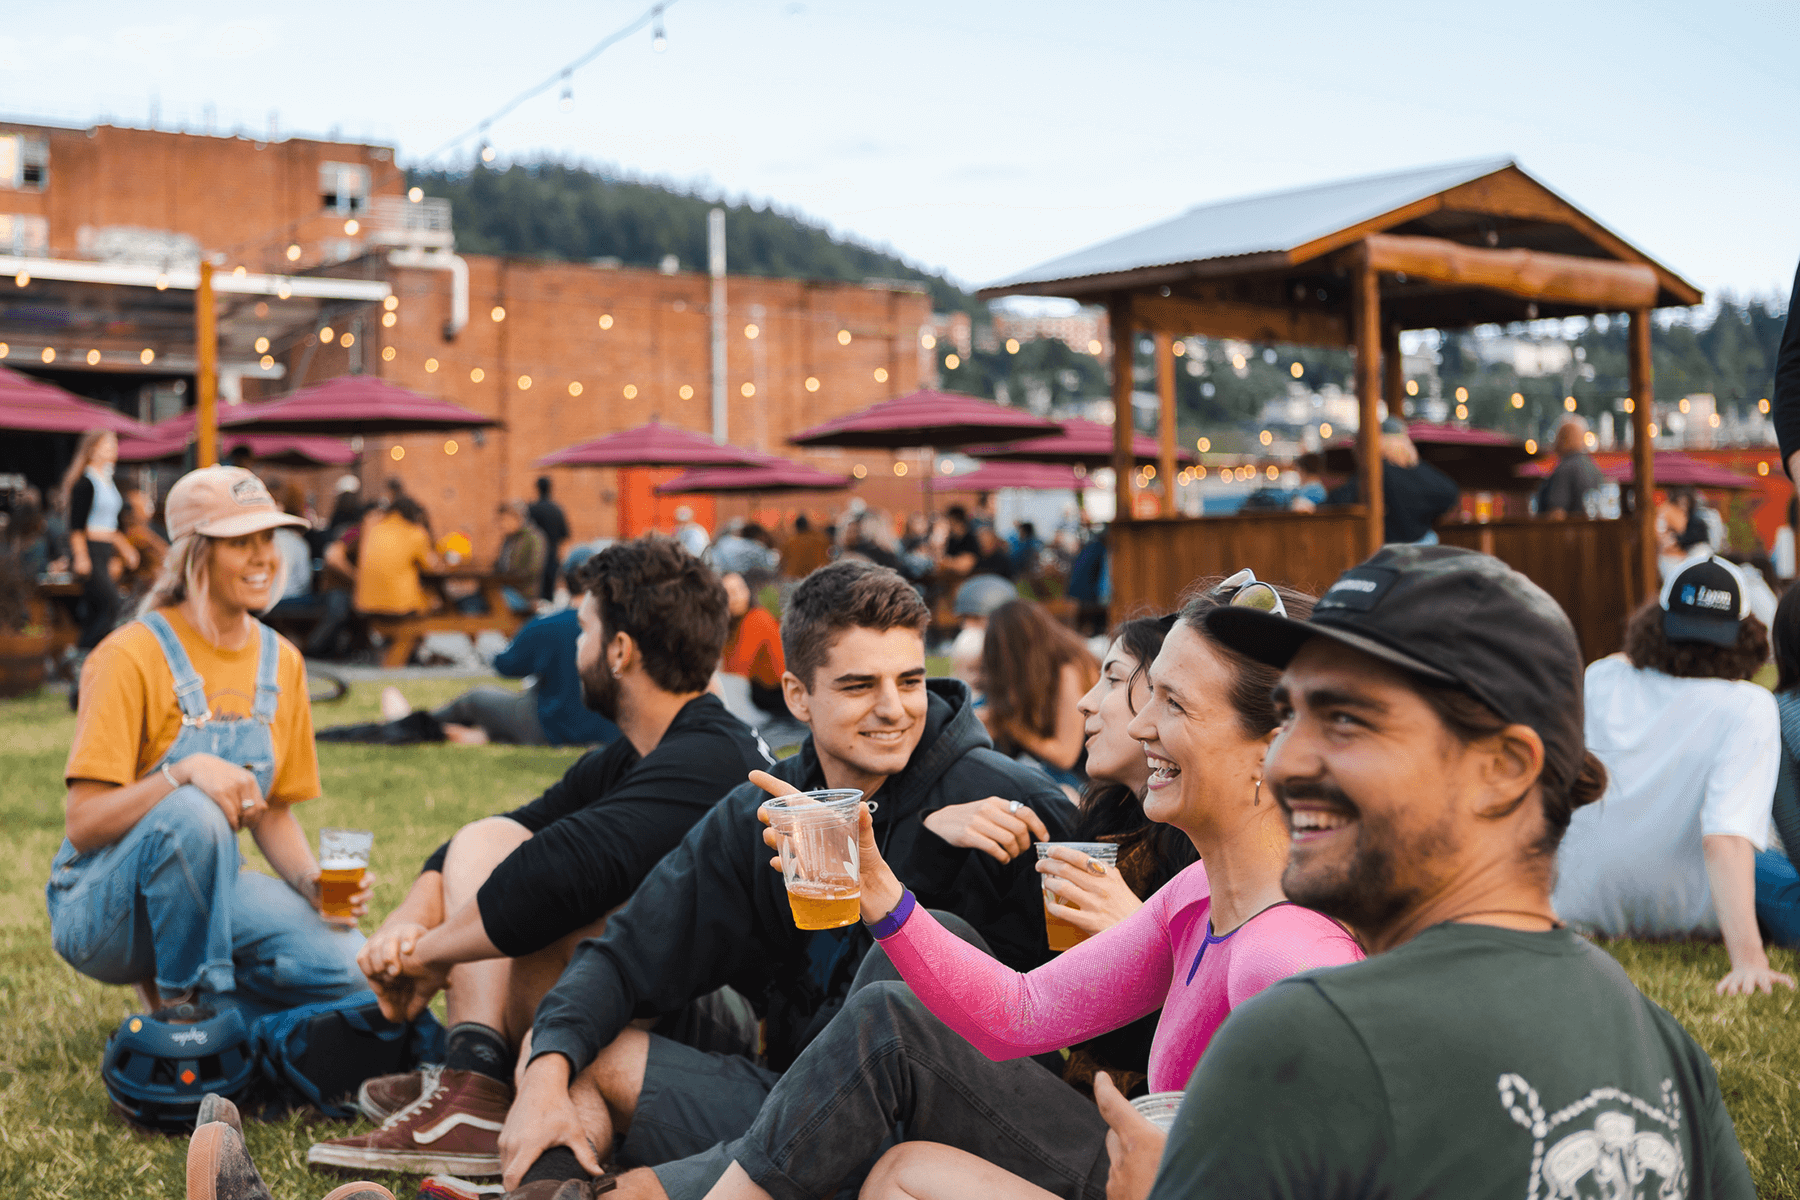 Outdoor event at Trackside Brewing in Bellingham, WA.